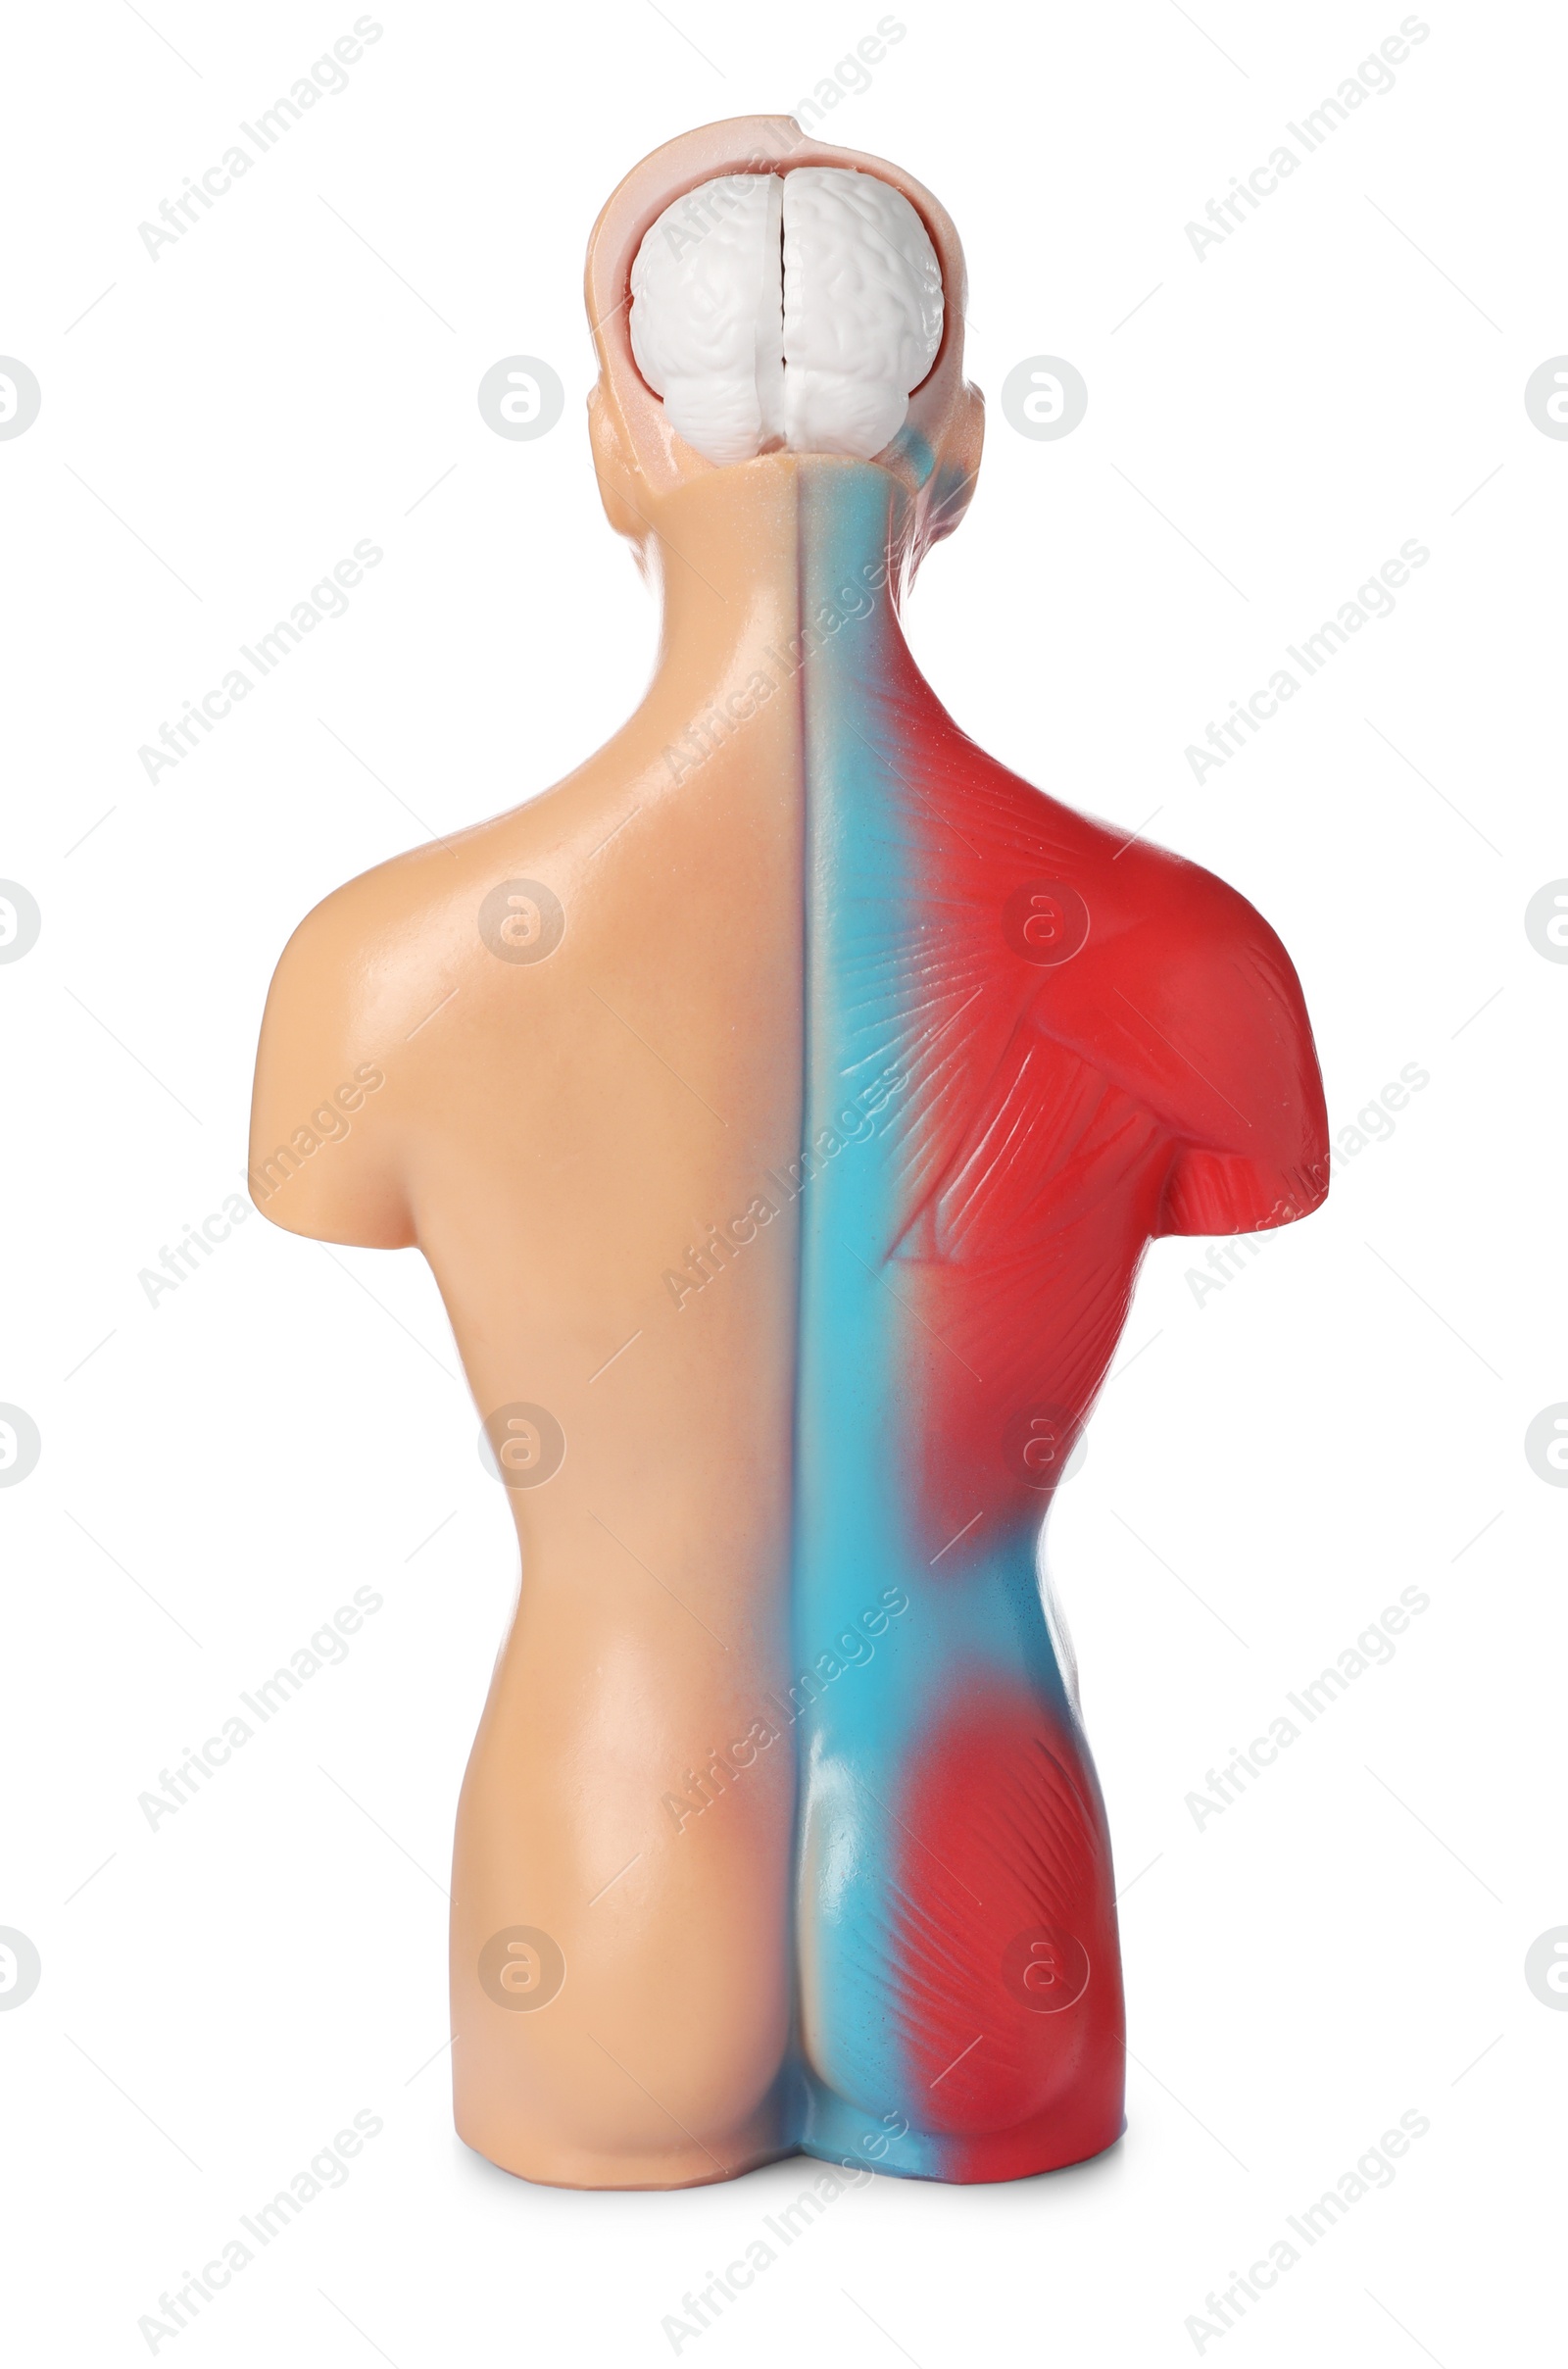 Photo of Human anatomy mannequin showing brain and muscles isolated on white